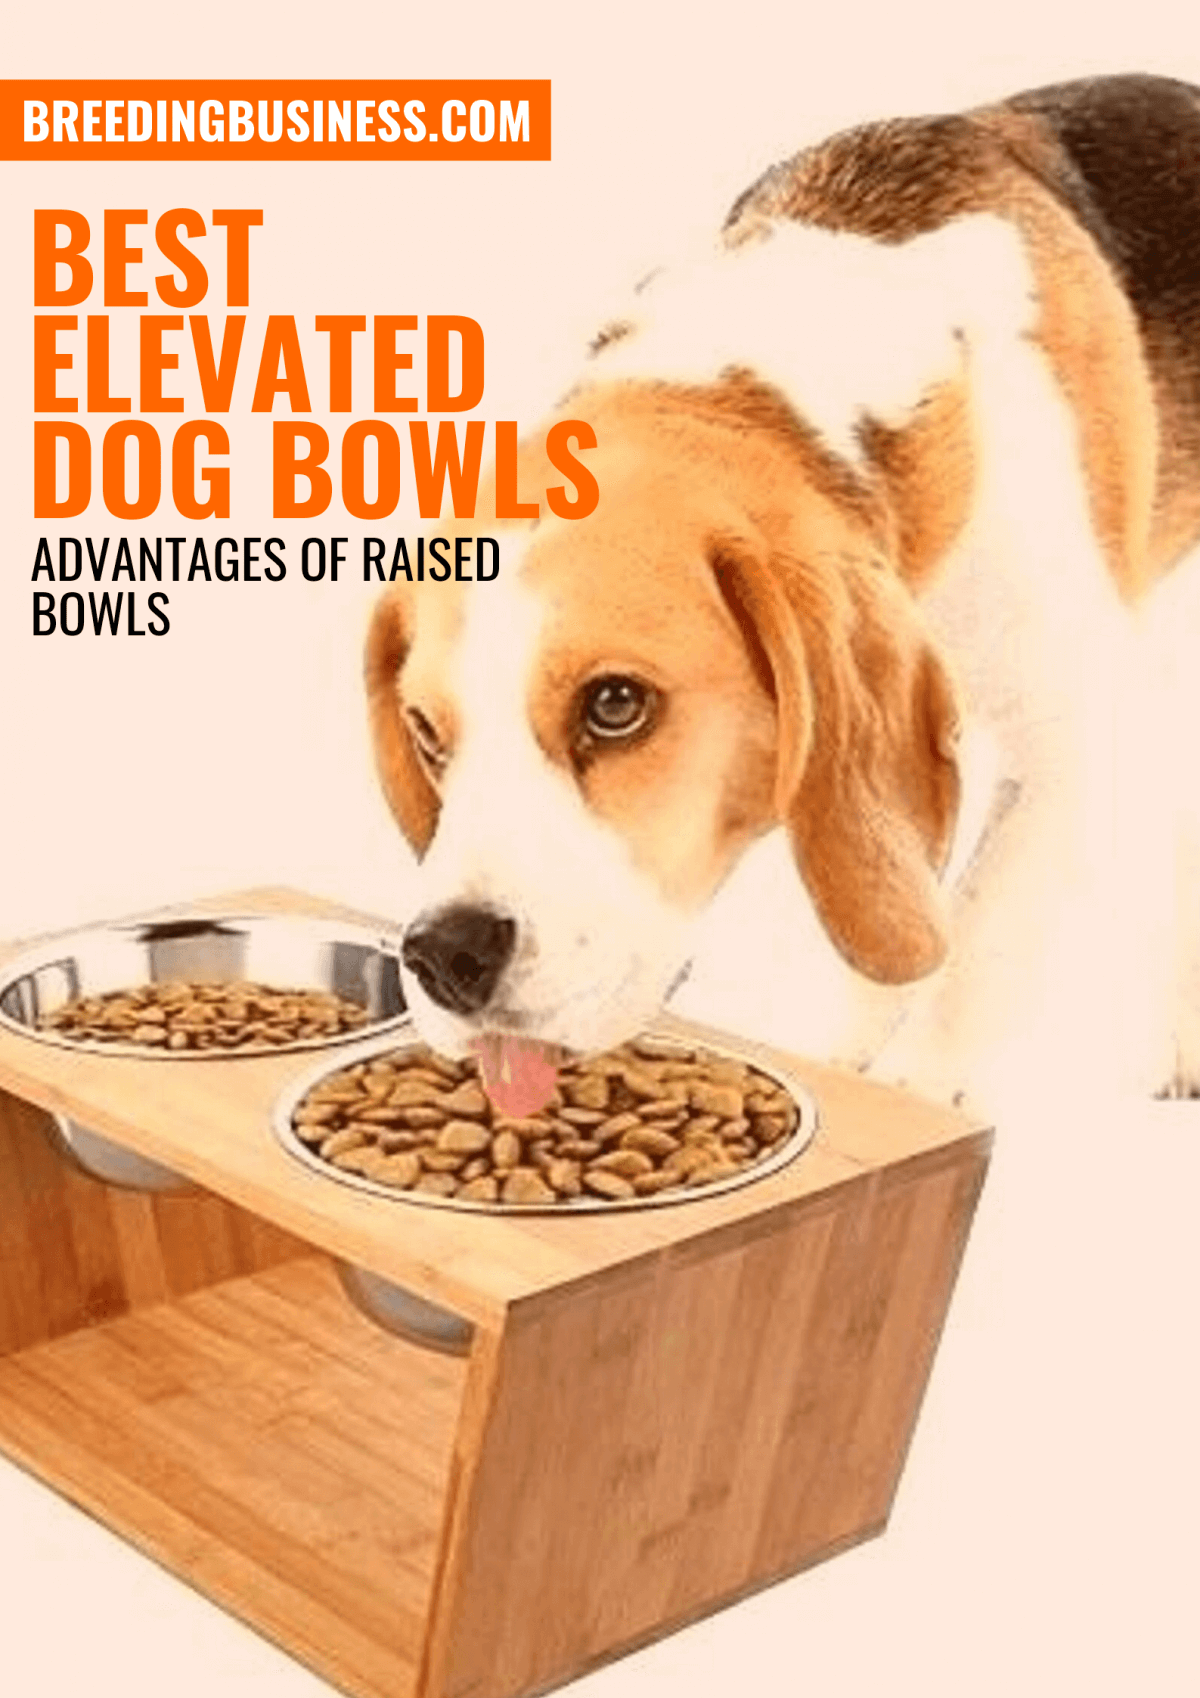 Top Raised Dog Bowls – Guide and Reviews